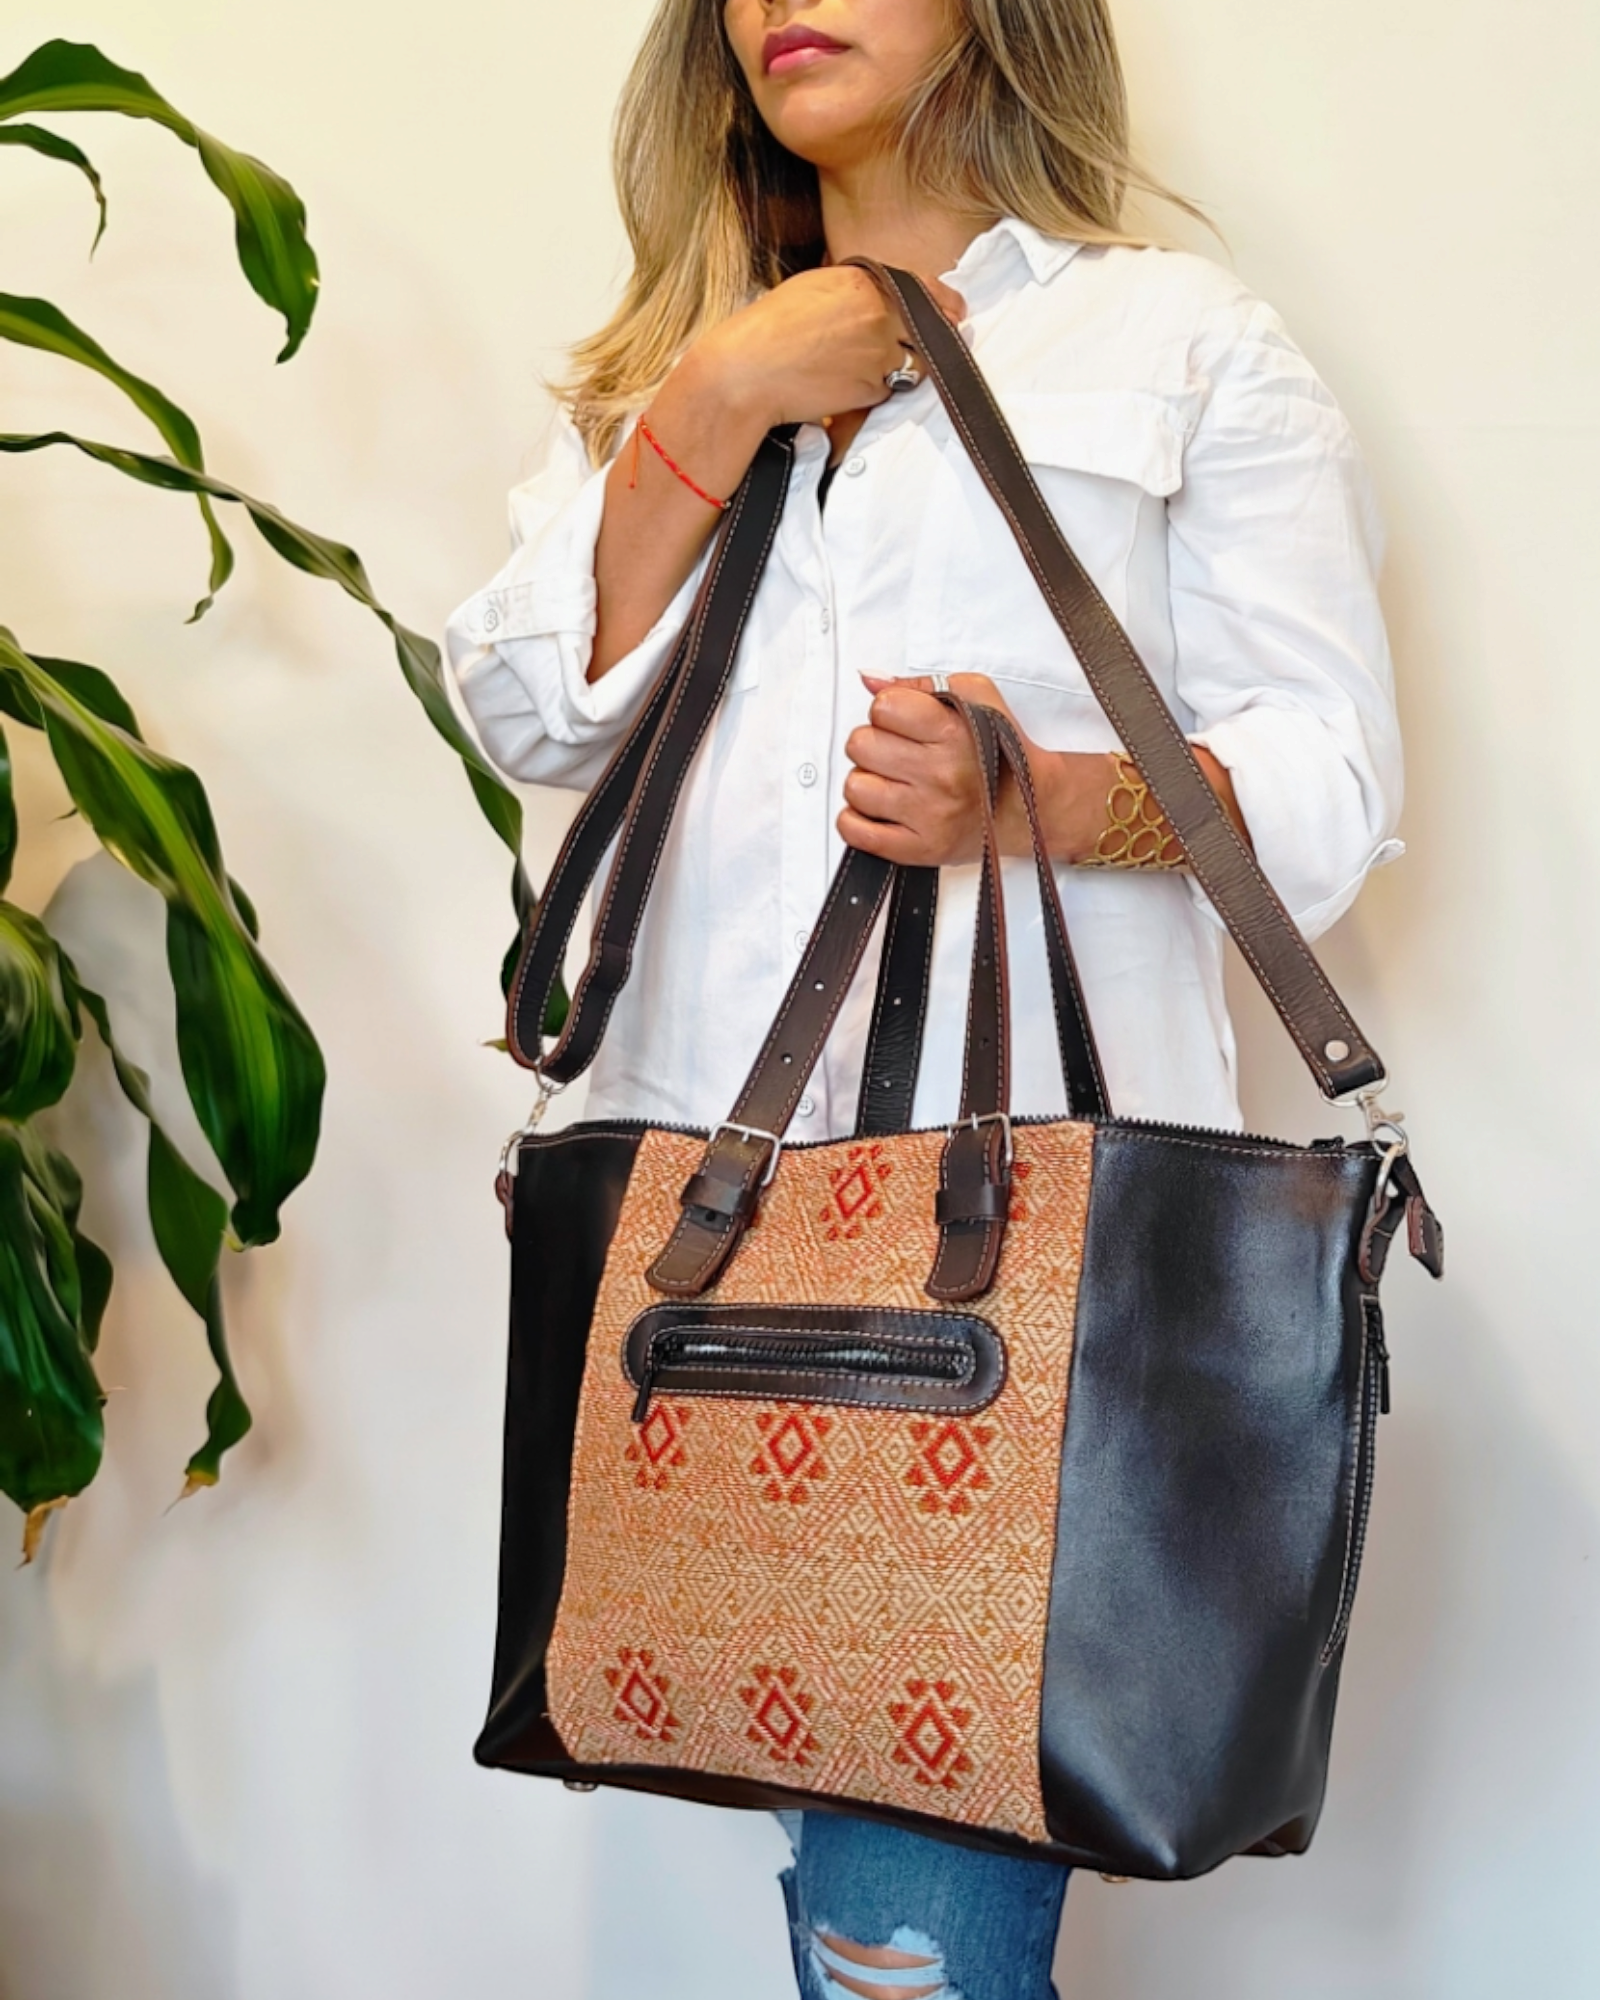 Handcrafted Embroidered Shulder bag for women - Ethnic leather tote bag -  AURA MAYA